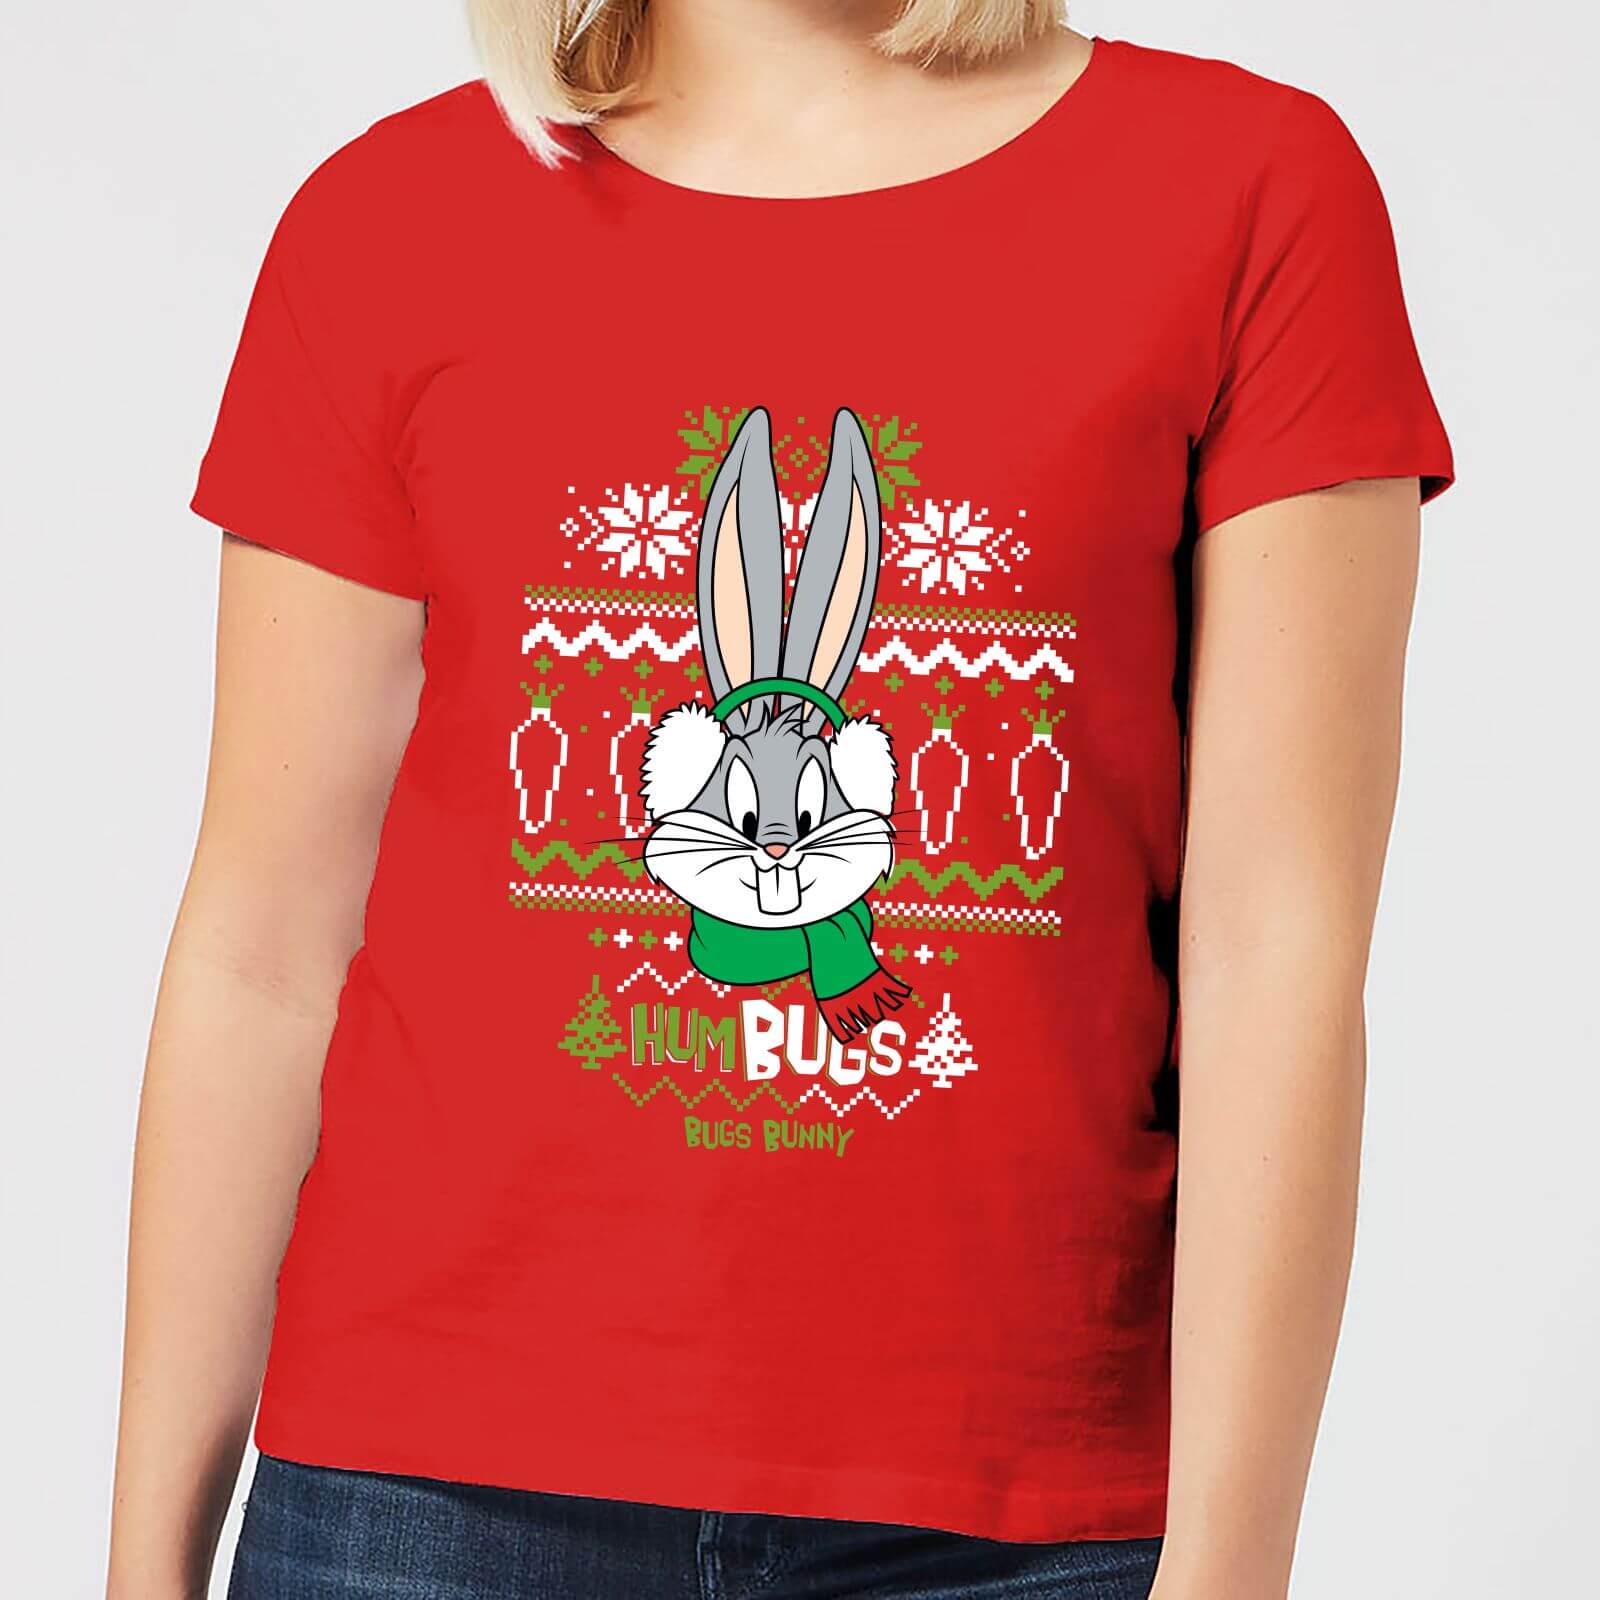 Looney Tunes Bugs Bunny Knit Women's Christmas T-Shirt - Red - S - Red